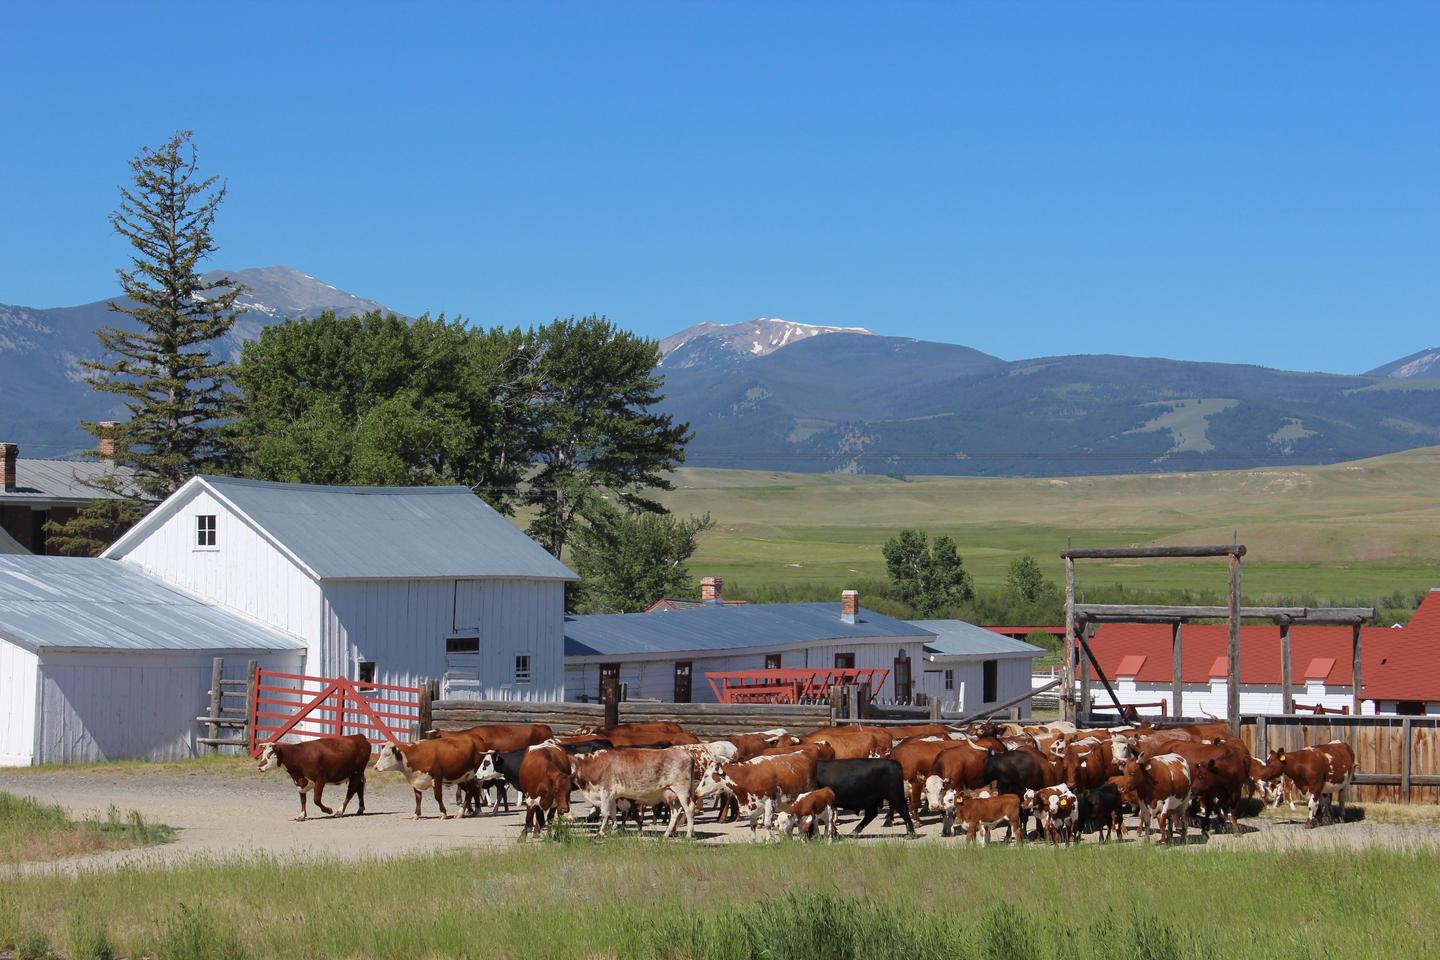 Cattle Herd MovingThe ranch cattle herd contains Hereford, Shorthorn and Texas Longhorn, which were popular breeds during the Open Range Cattle Era